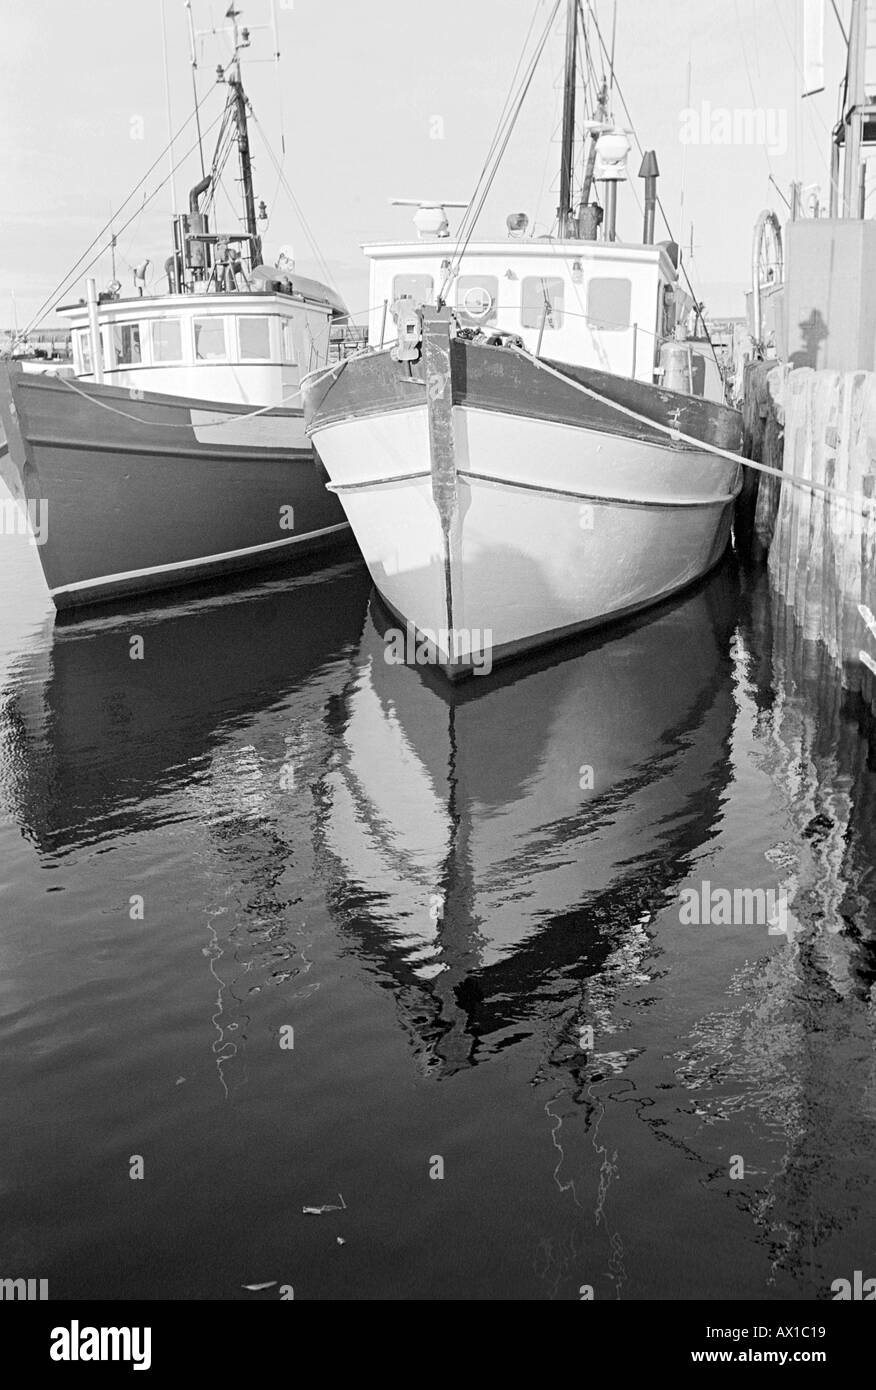 Commercial fishing boats Black and White Stock Photos & Images - Alamy